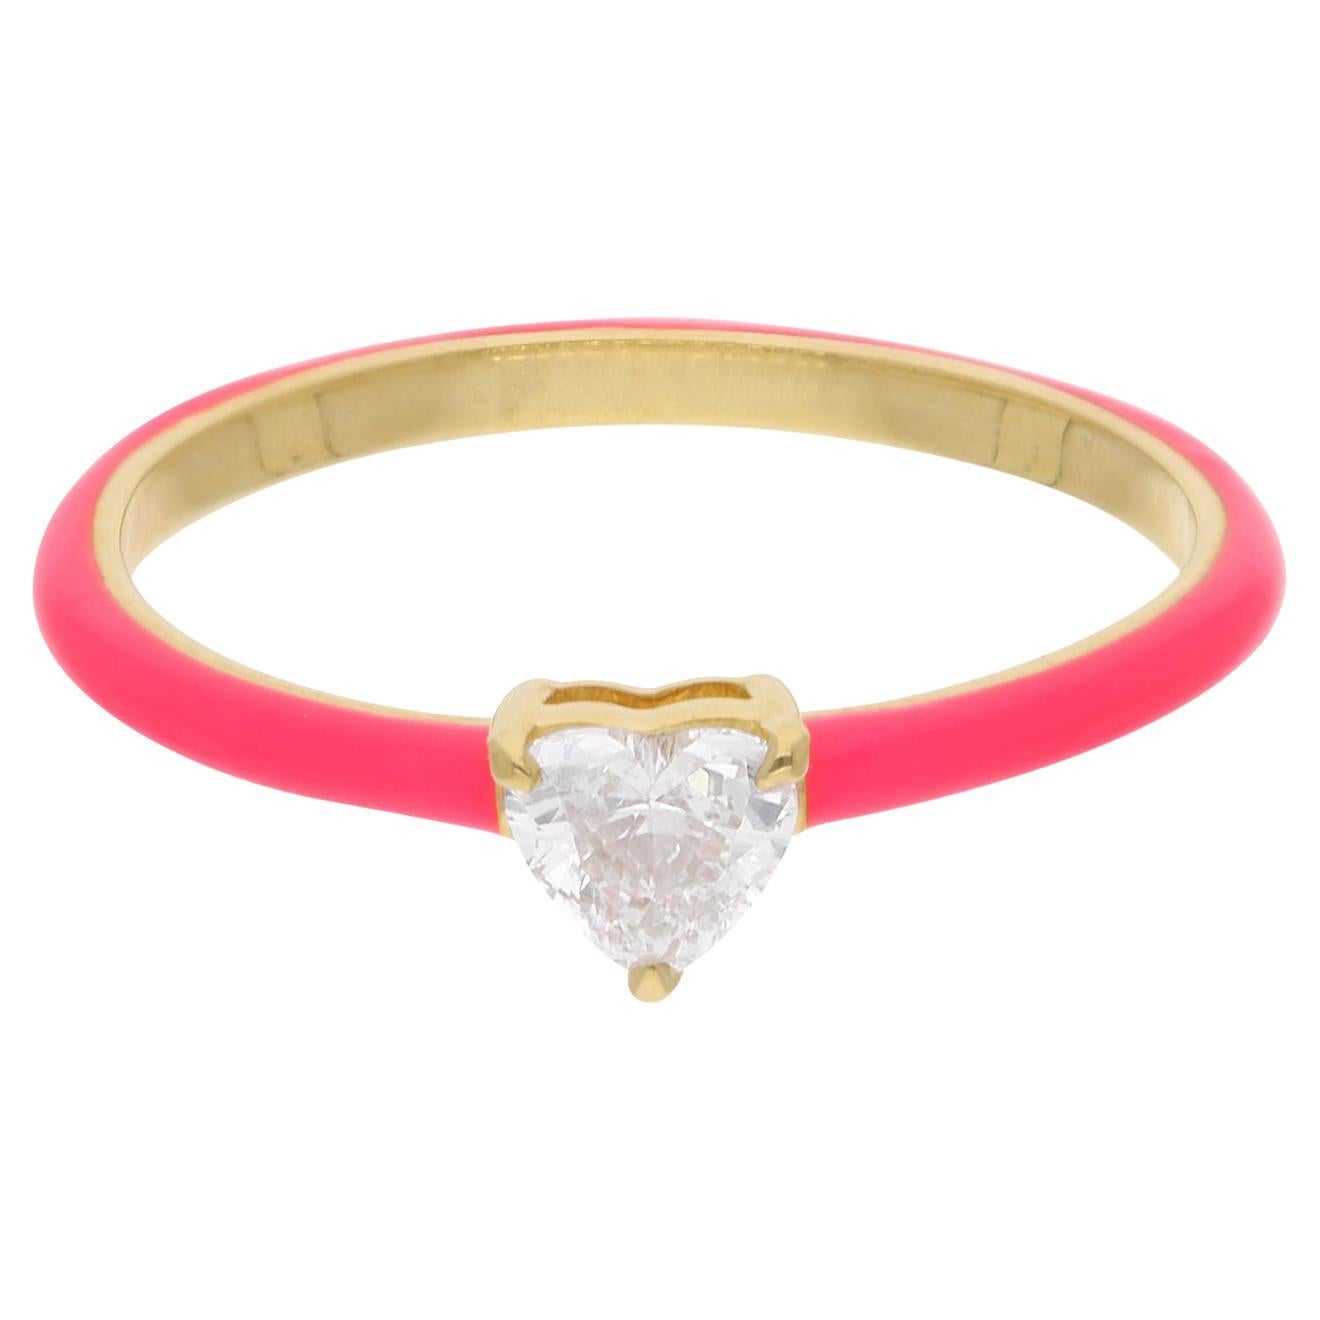 0.3 Carat Solitaire Heart Diamond Red Enamel Band Ring 14 Kt Yellow Gold Jewelry